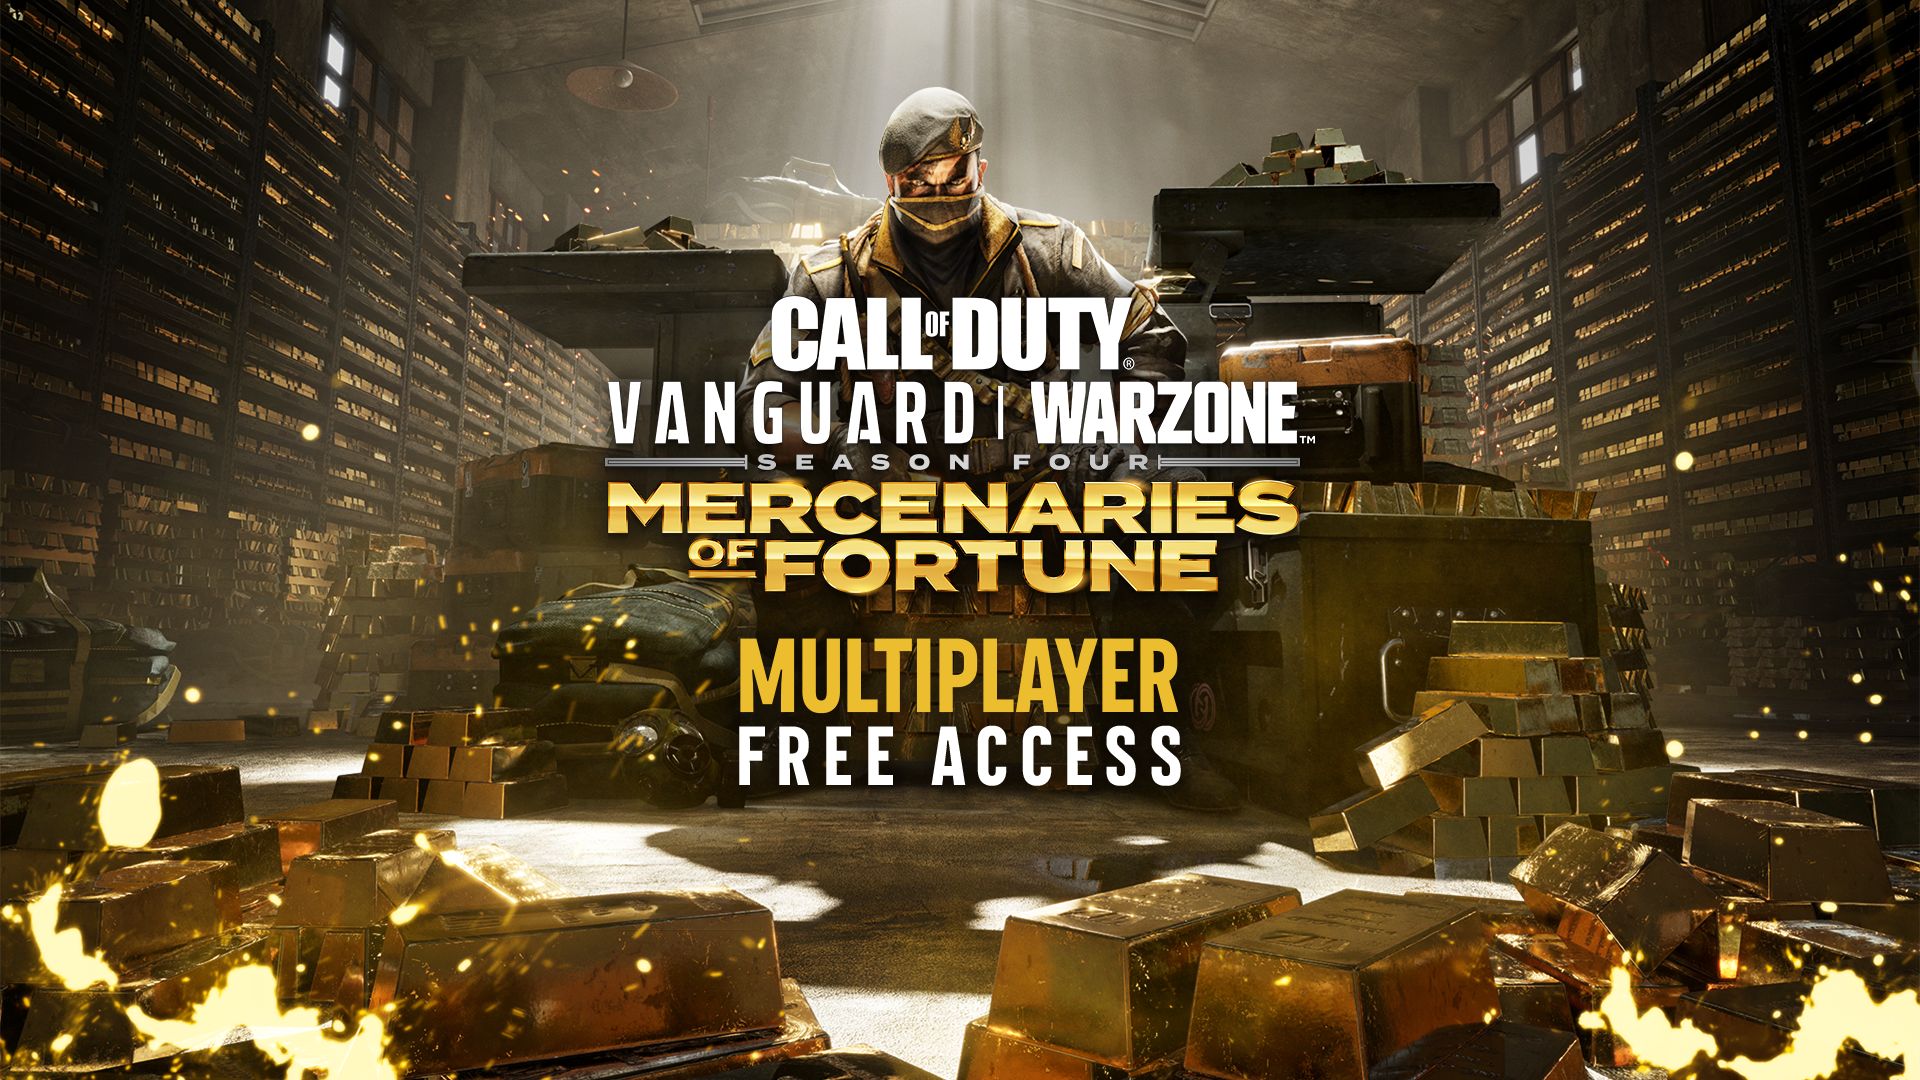 Call of Duty: Vanguard offers free access to multiplayer and Zombies